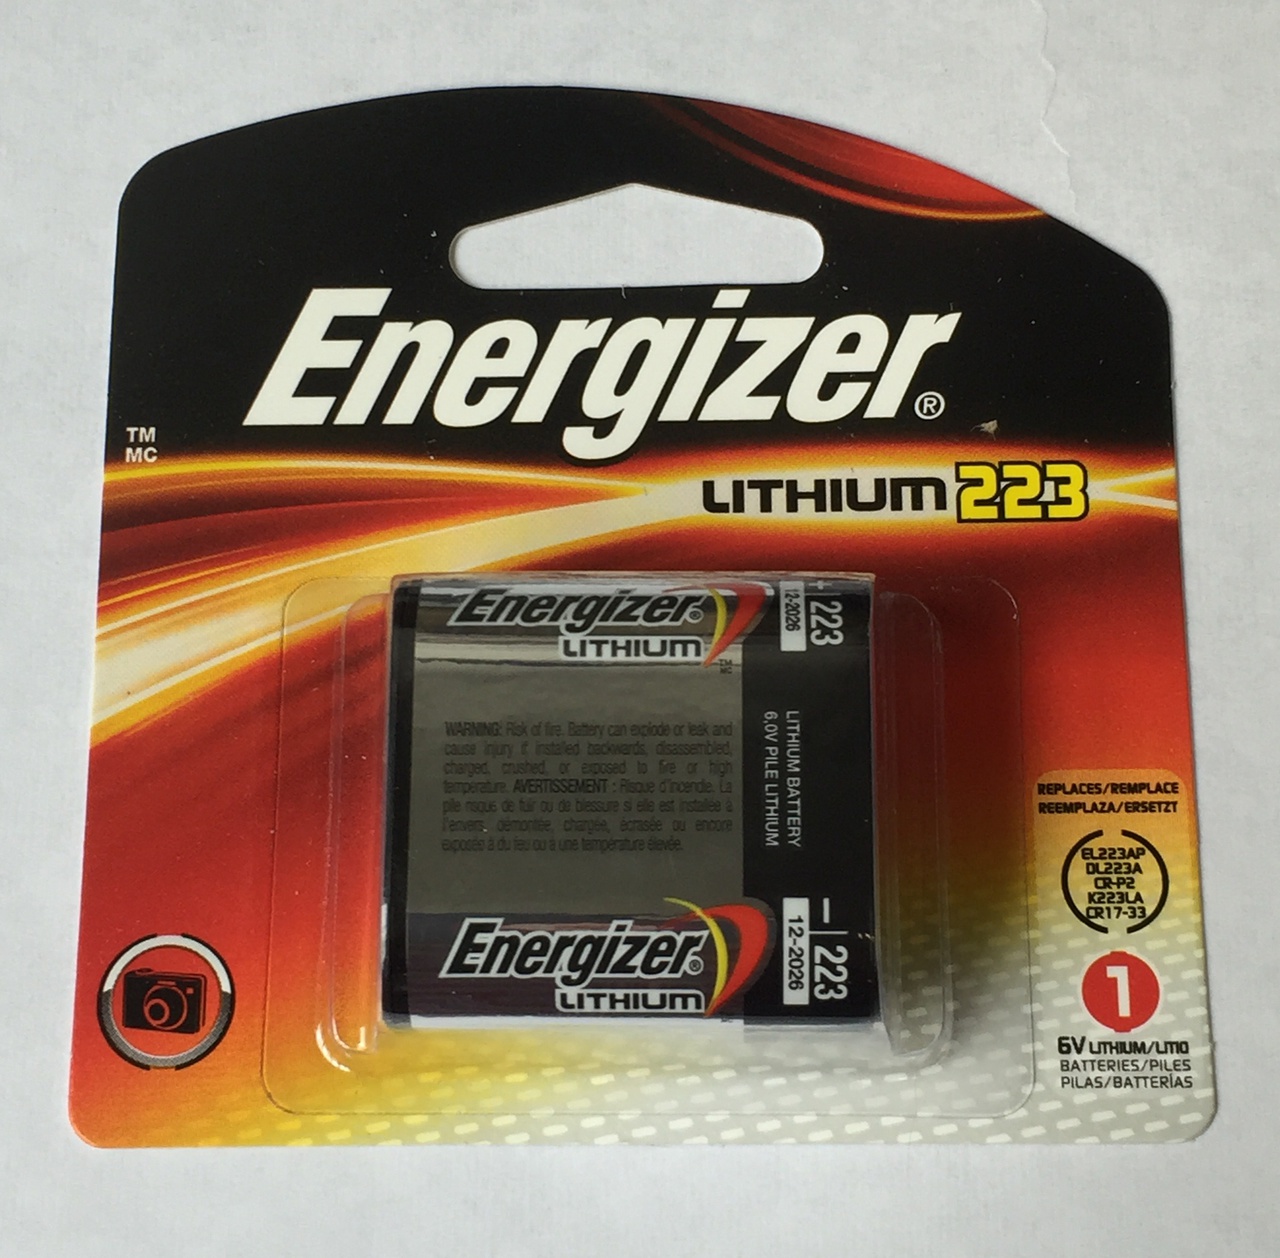 Energizer 223 6V  Lithium Photo Battery CRP2 CR17-33 - 1 Pack + FREE SHIPPING